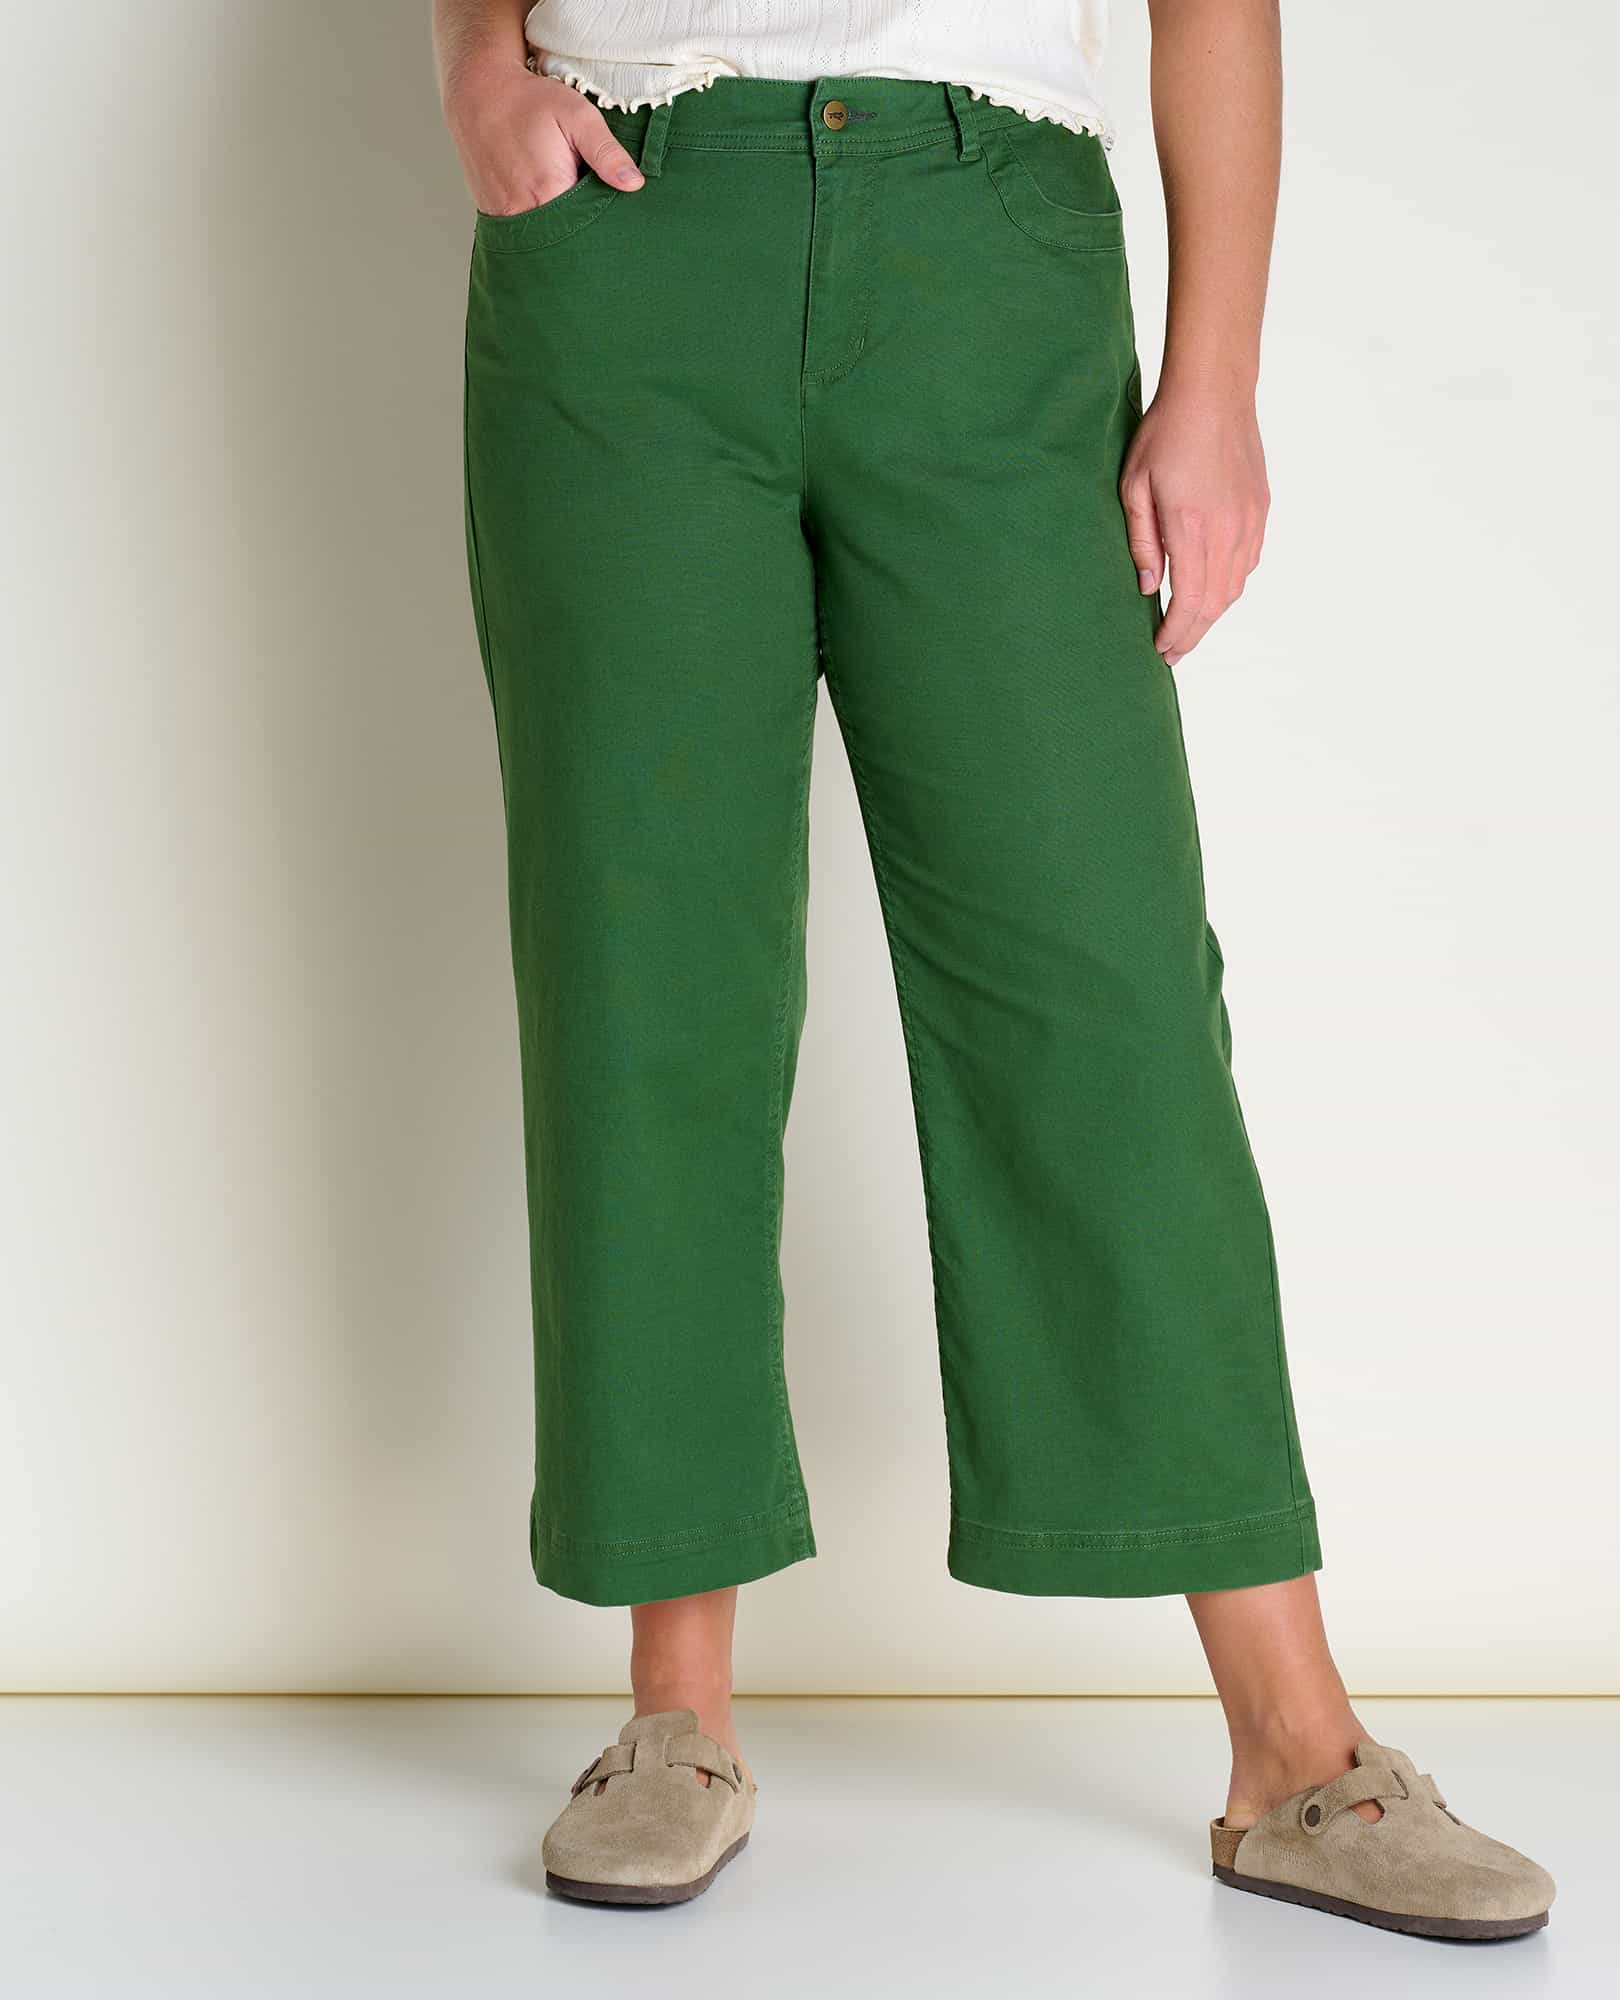 Women's High Waist Cotton Crop Pant for Wide Hips and Full Thighs